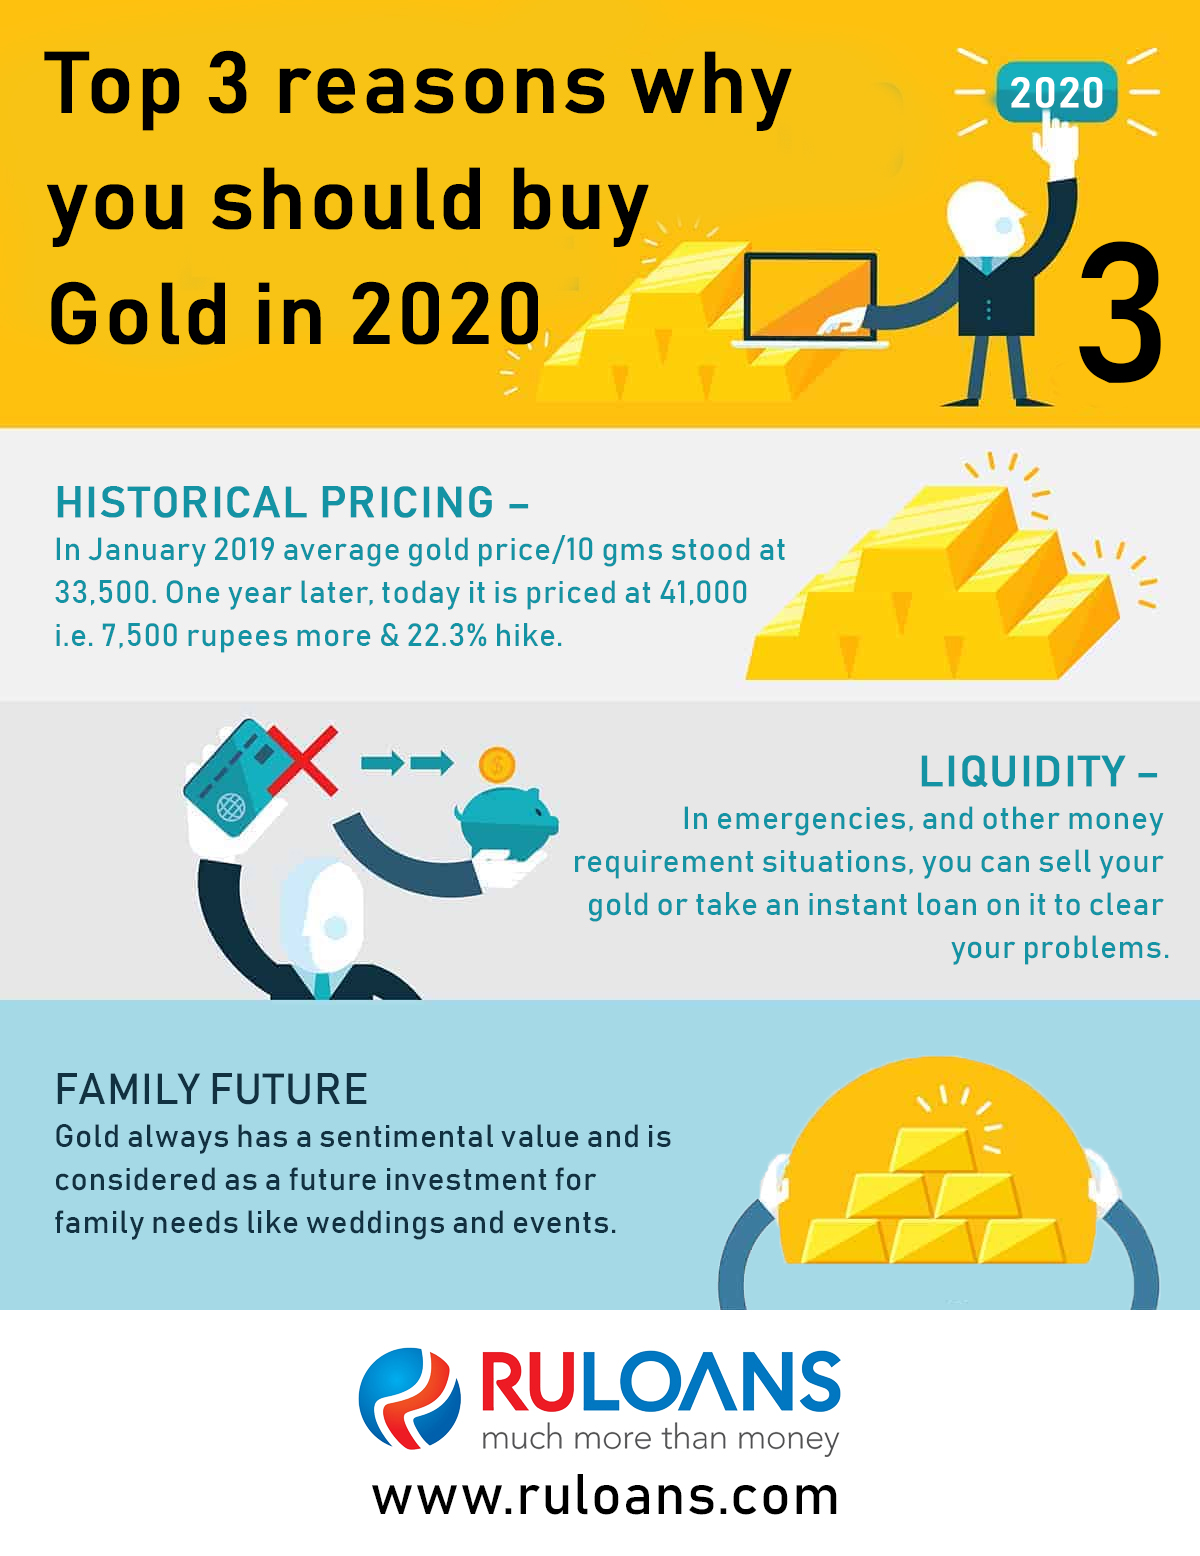 3 reasons why you should buy Gold in 2020